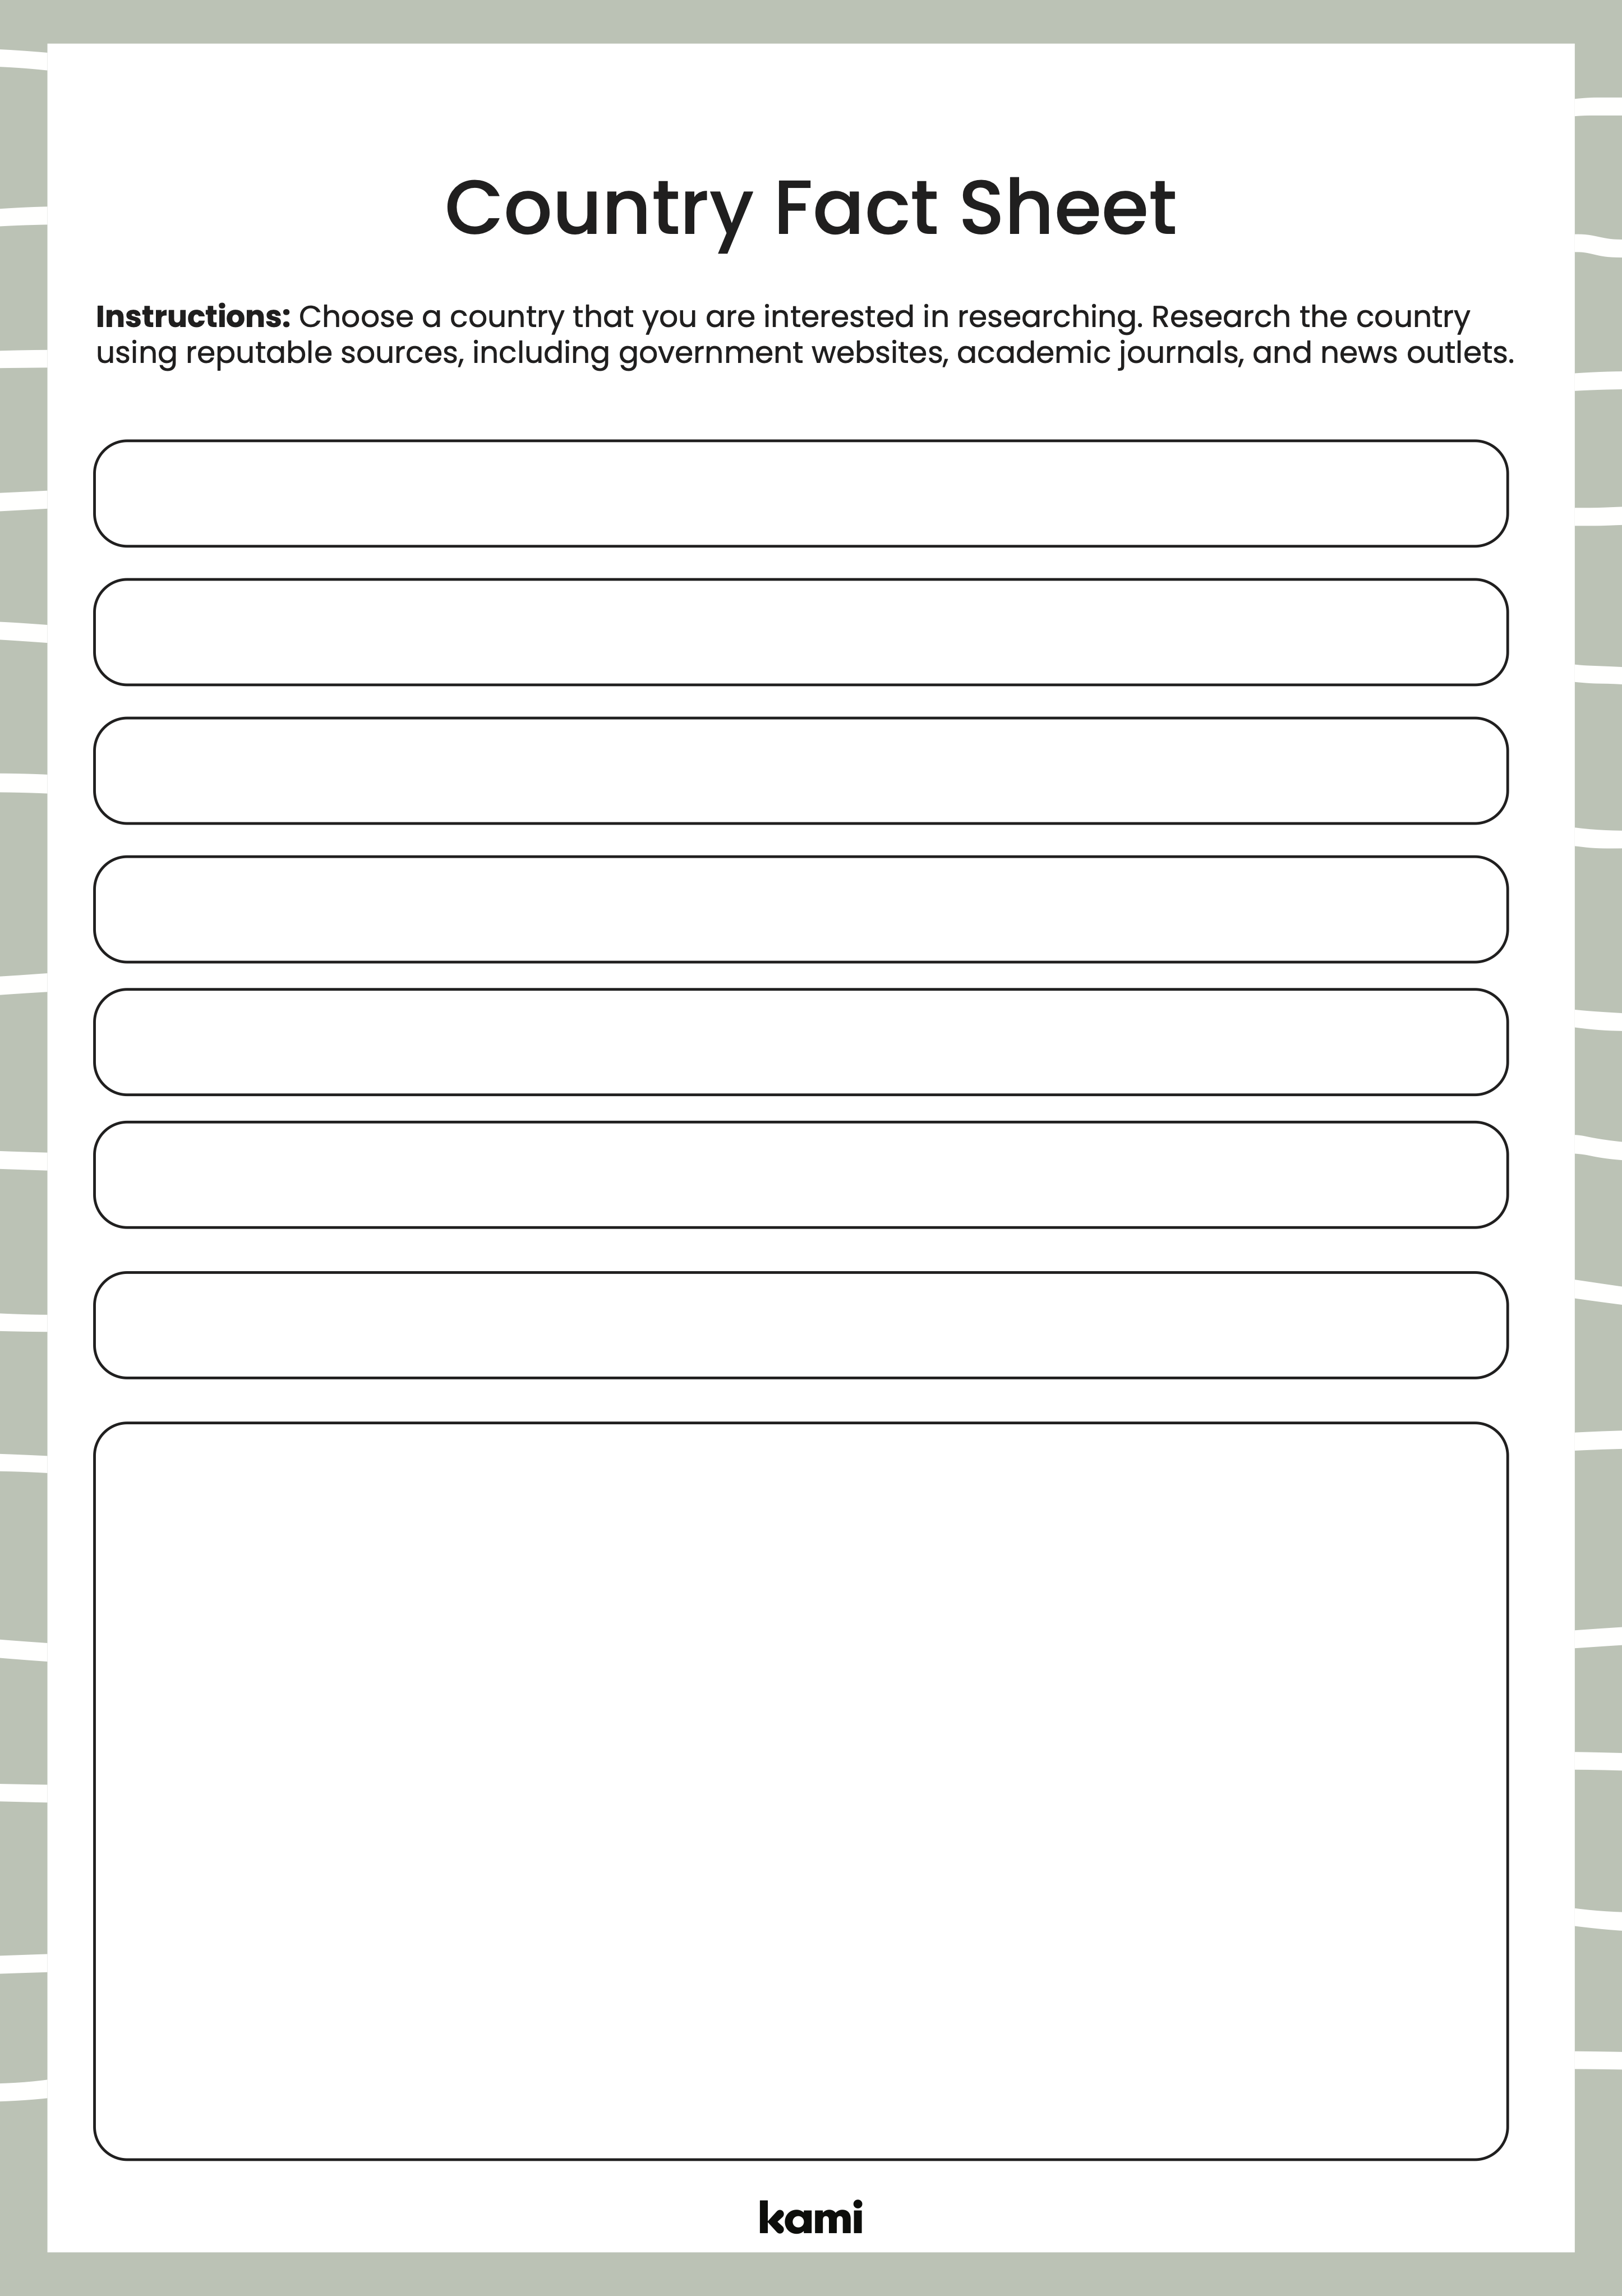 country-fact-sheet-blank-for-teachers-perfect-for-grades-10th-11th